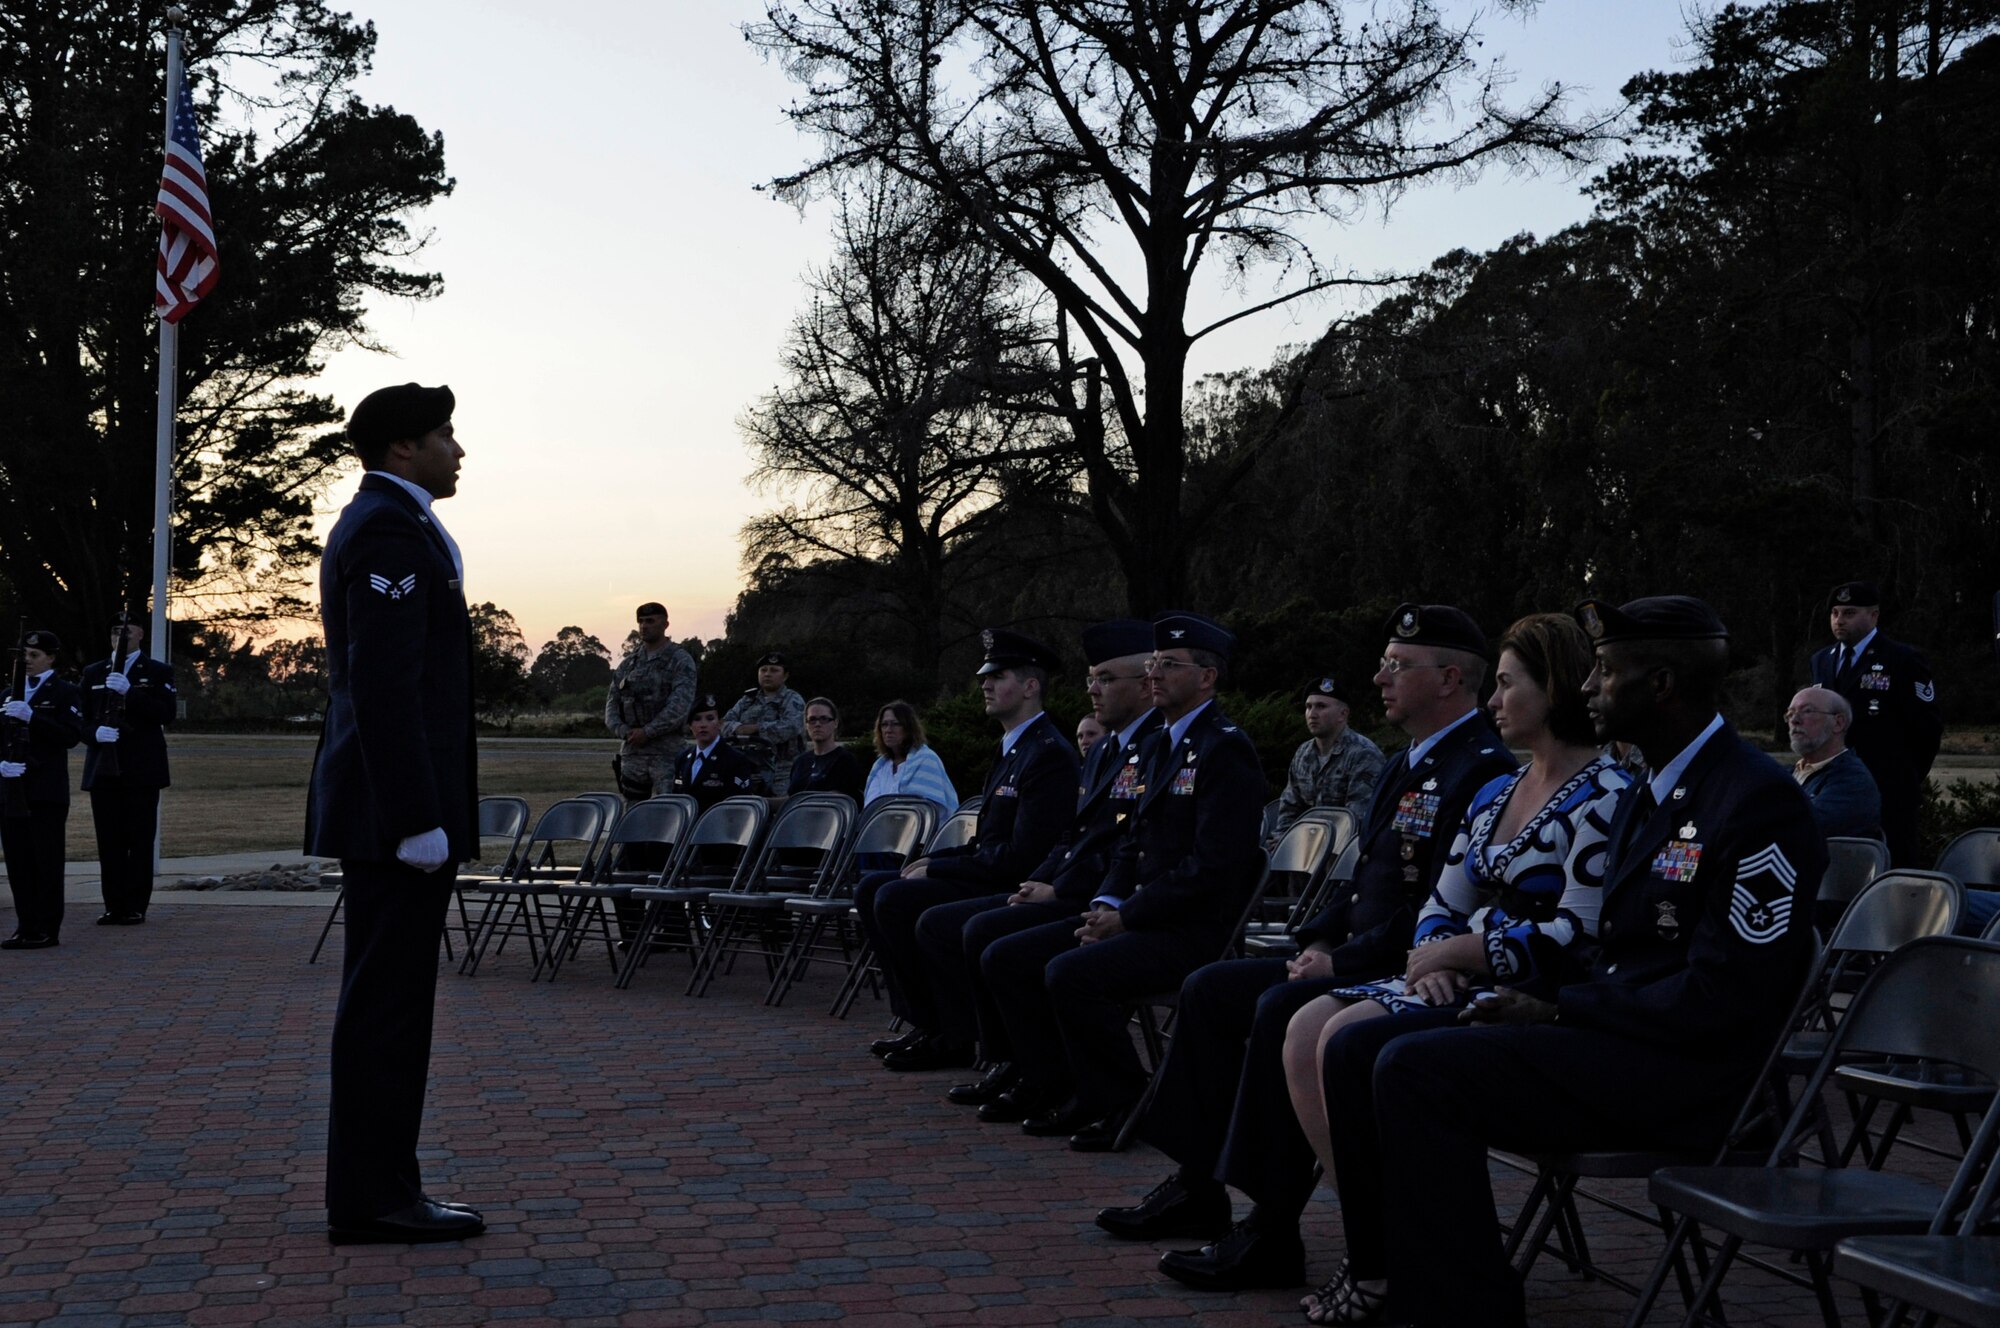 Guests gather for a 24-hour vigil and candle-lighting ceremony, May 15, Vandenberg Air Force Base, Calif. As part of National Police Week, Airmen with the 30th Security Forces Squadron remembered their fallen comrades during the vigil. (U.S. Air Force photo by Senior Airman Shane Phipps/Released)
